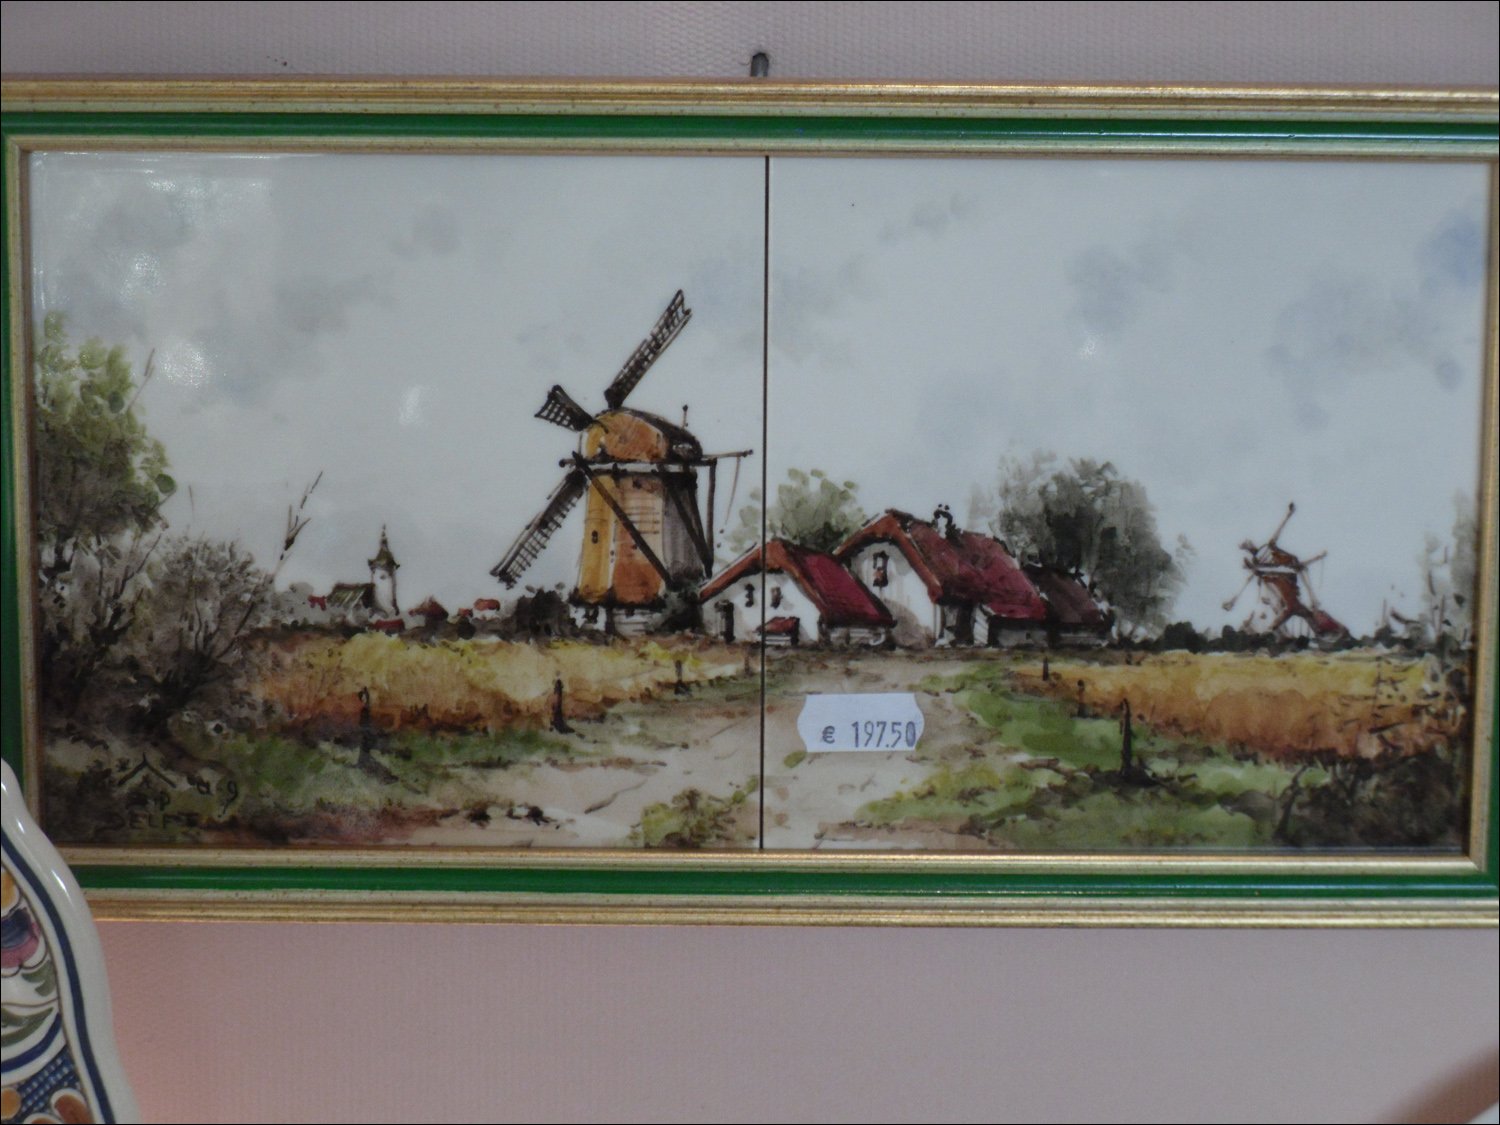 Delfts Pauw - yes, those are euros for the tile